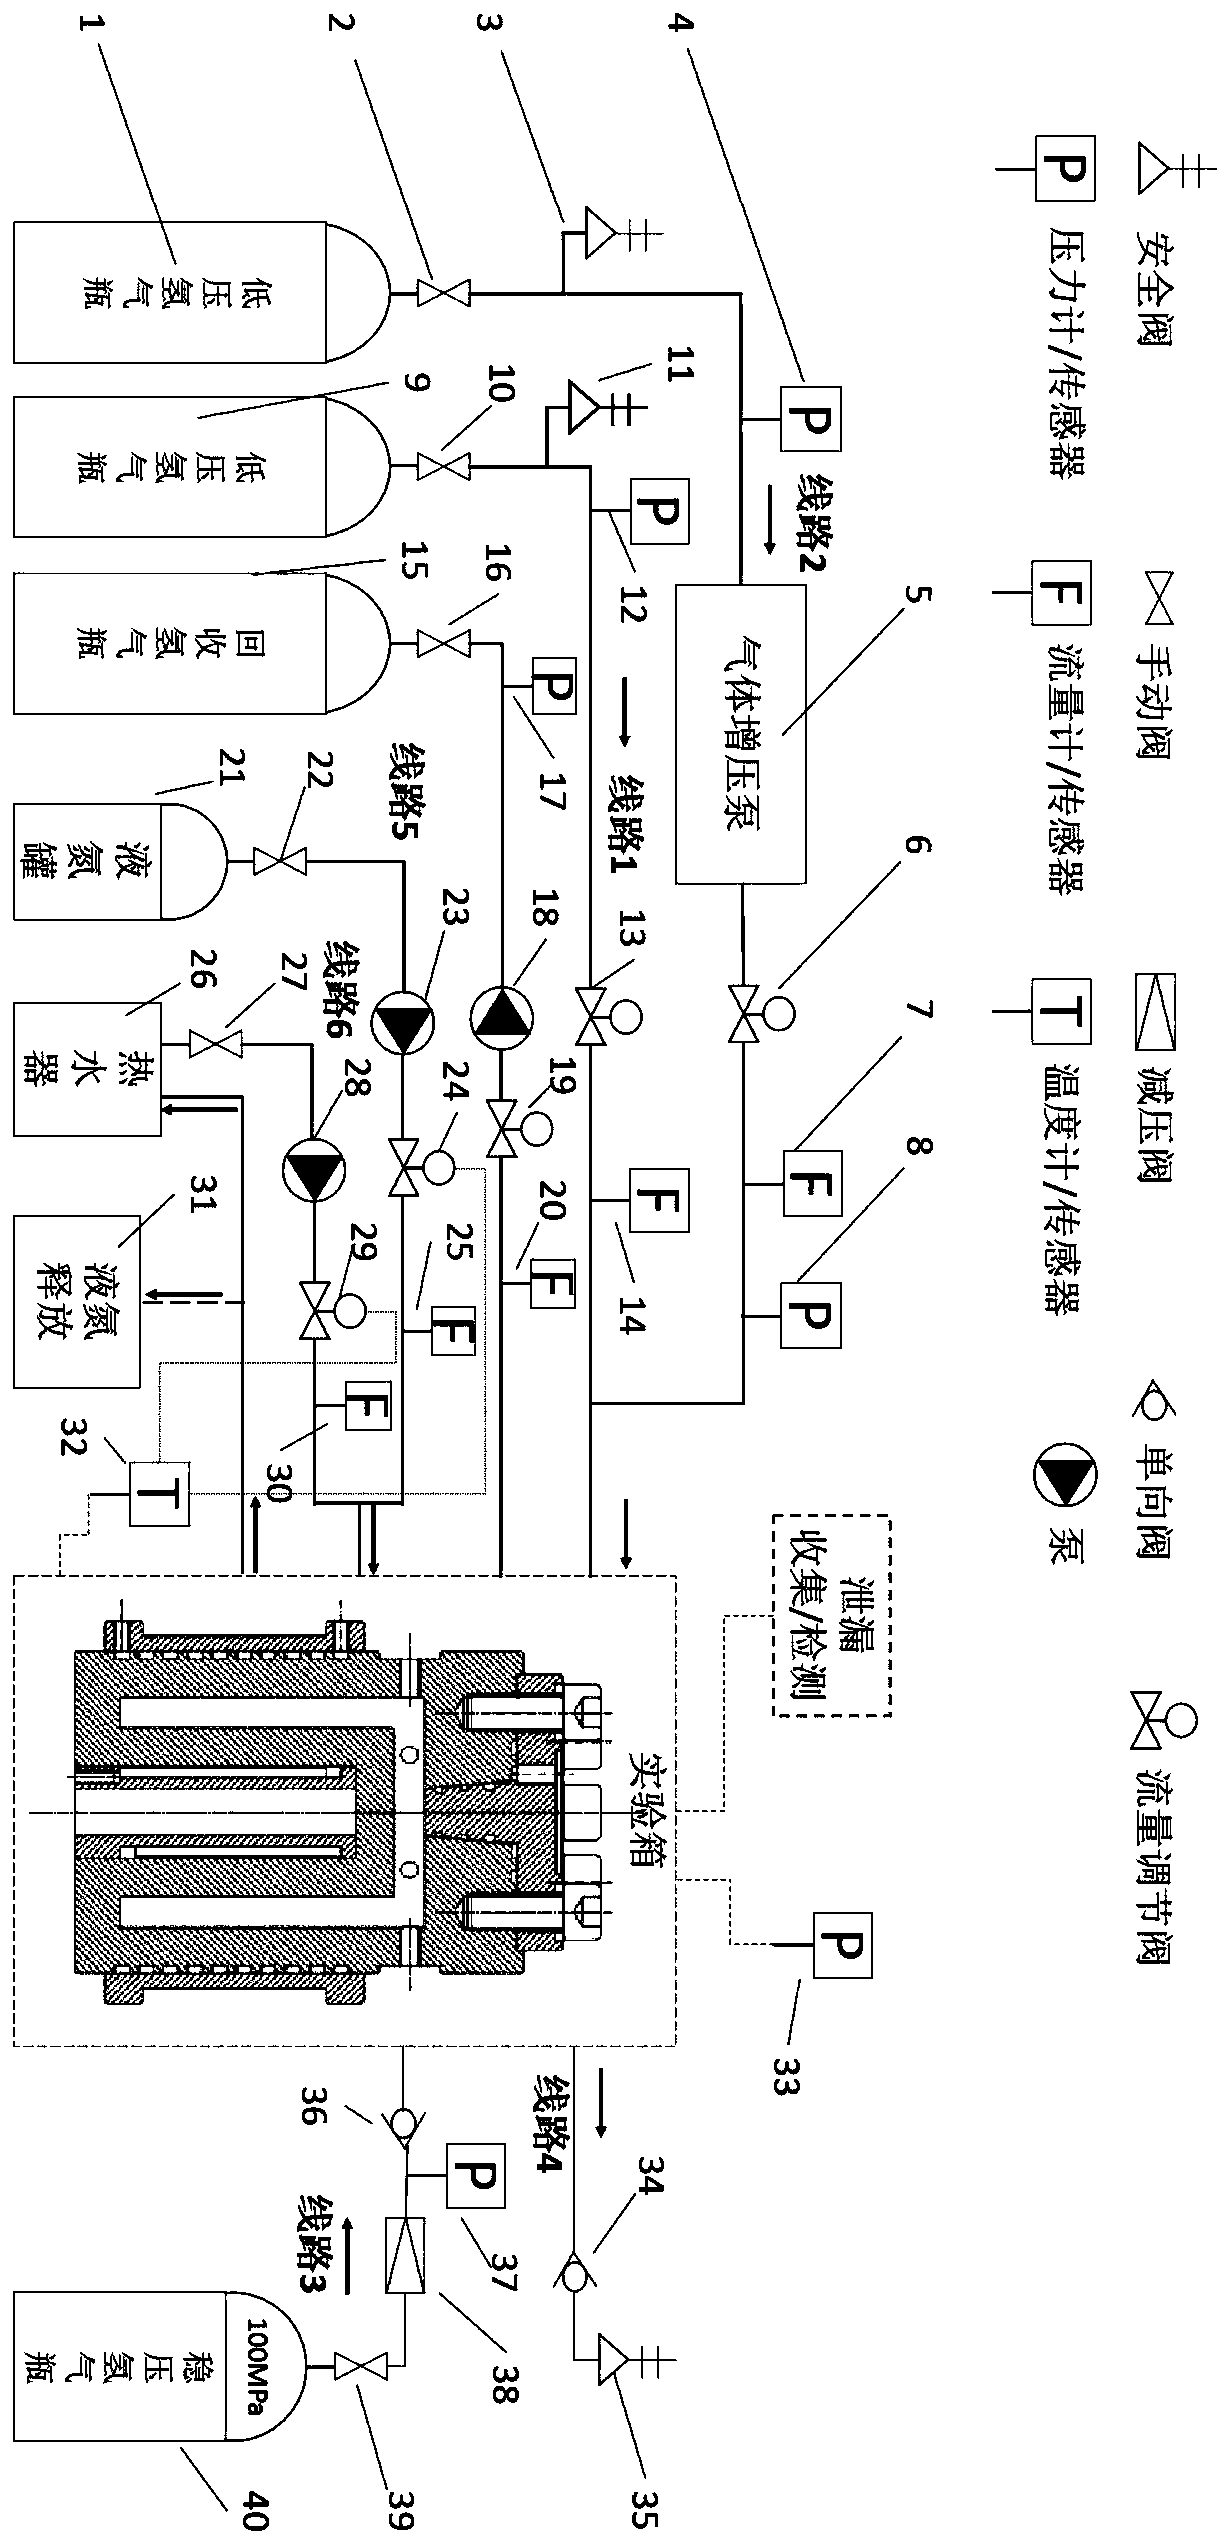 Auxiliary system for controllable temperature-control pressure gas sealing test platform